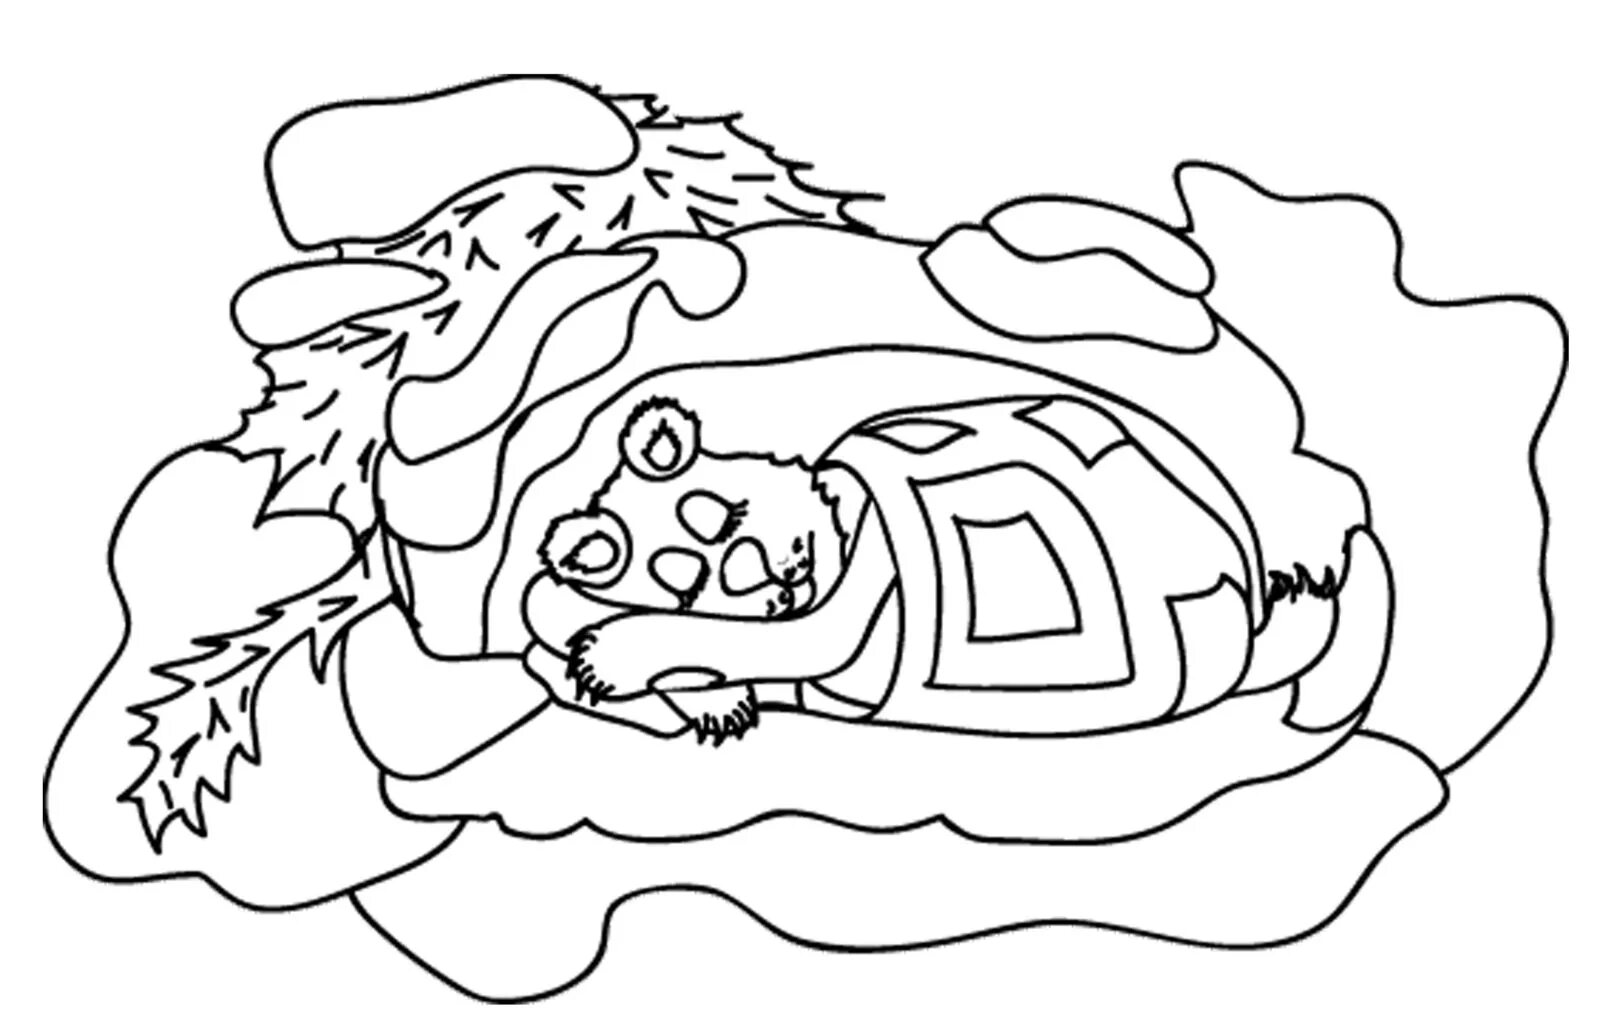 Coloring page pensive bear in the lair